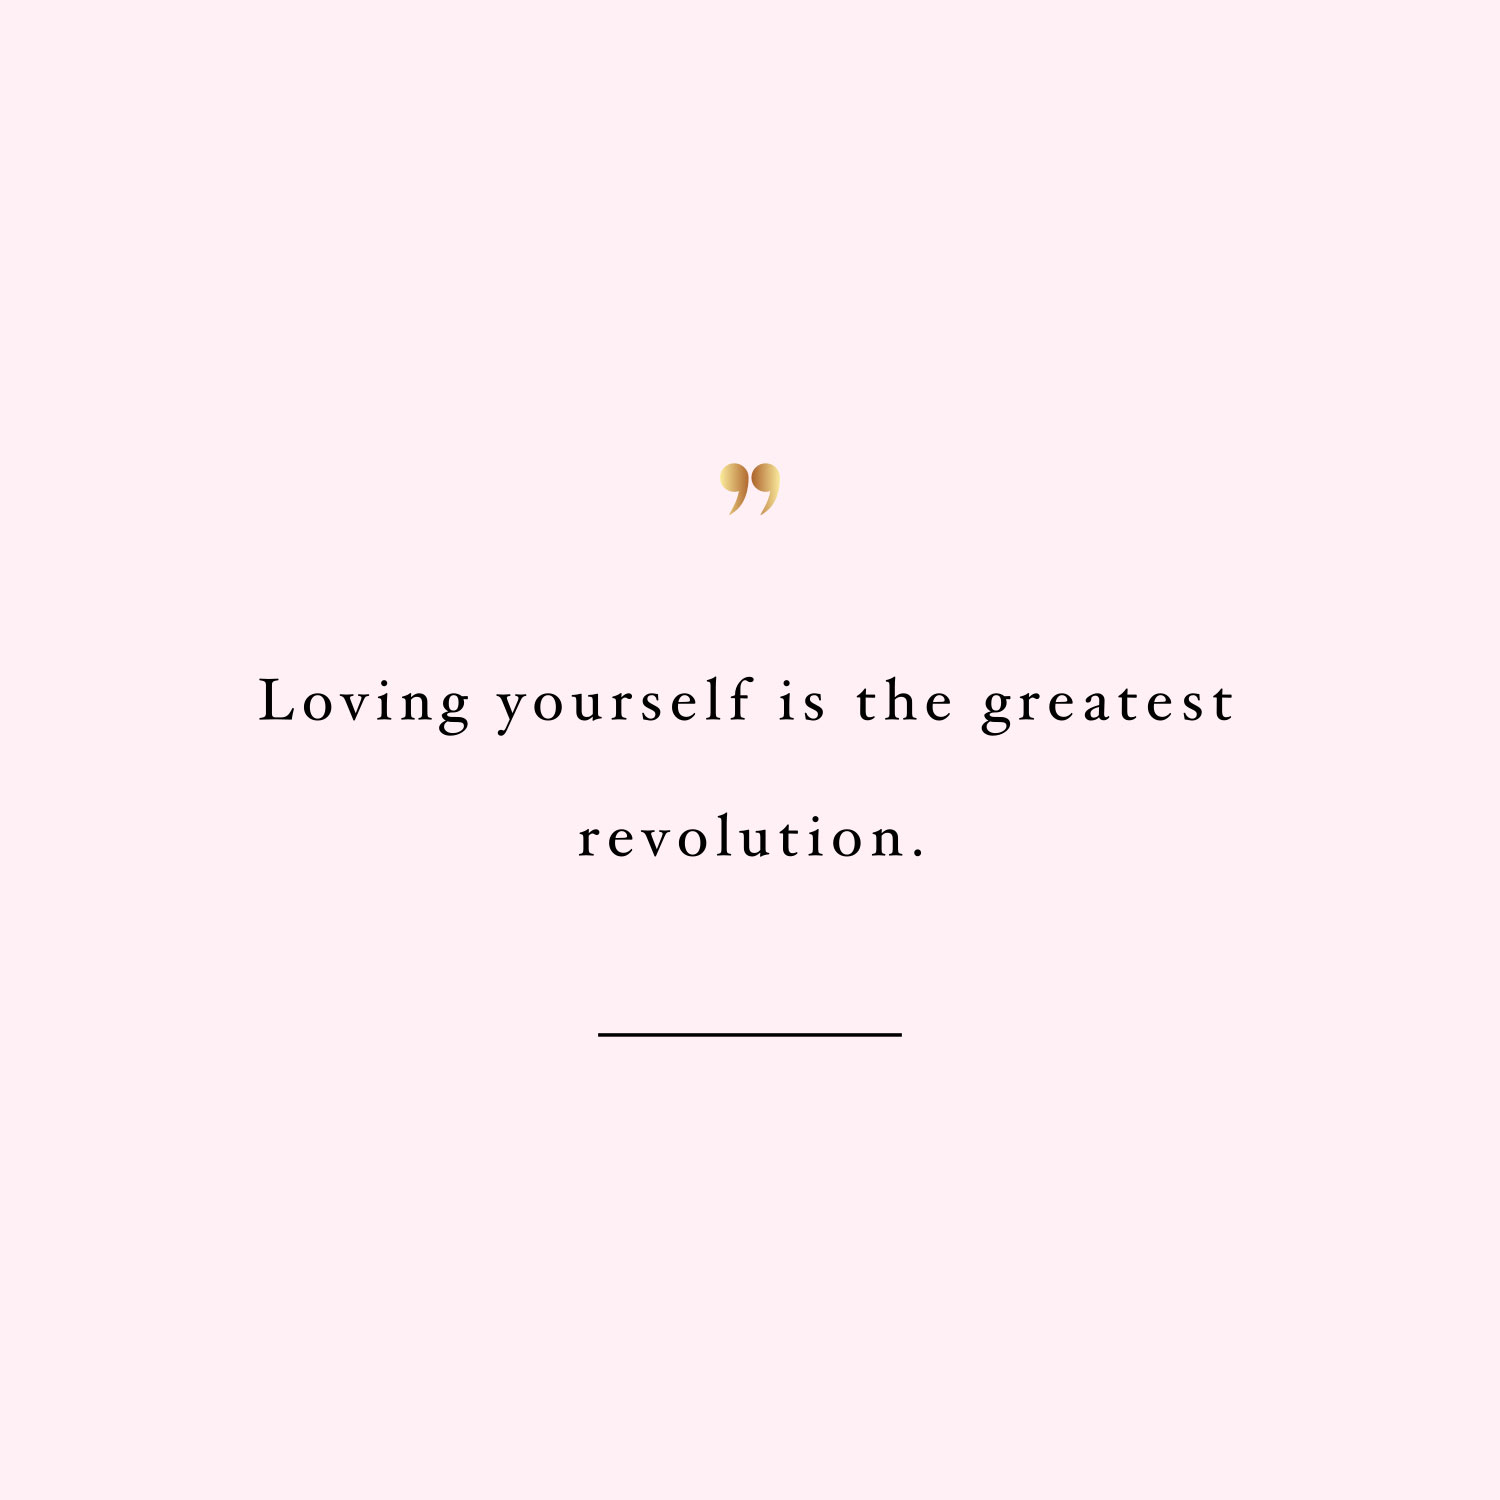 Loving yourself revolution! Browse our collection of inspirational exercise and fitness quotes and get instant weight loss and healthy lifestyle motivation. Stay focused and get fit, healthy and happy! https://www.spotebi.com/workout-motivation/loving-yourself-revolution/